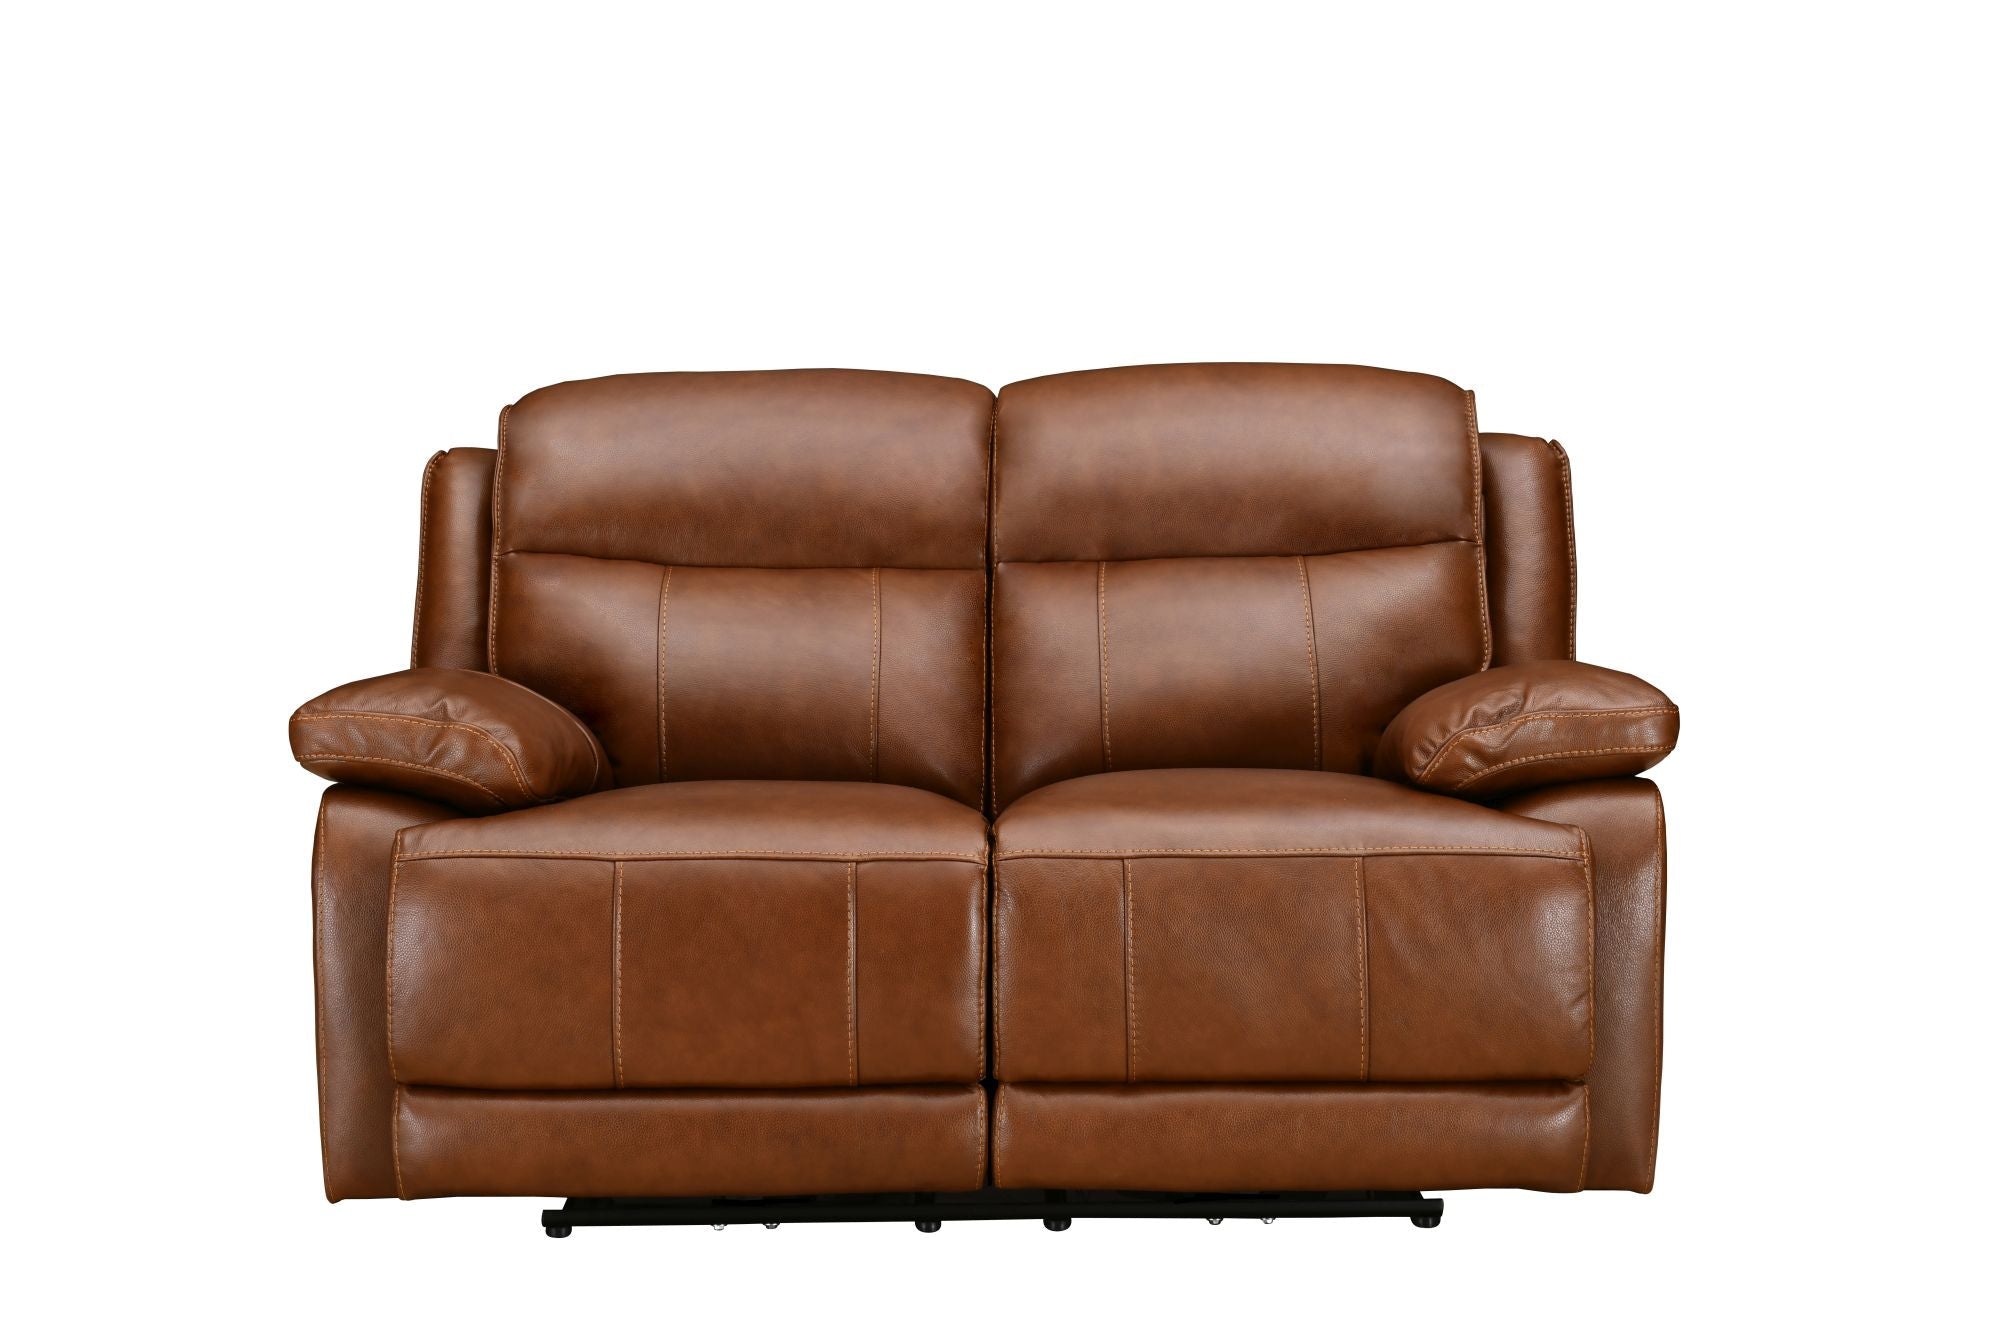 Montana Luxury 2-Seater Armchair with Power Recliner & Adjustable Headrest - Contemporary Comfort